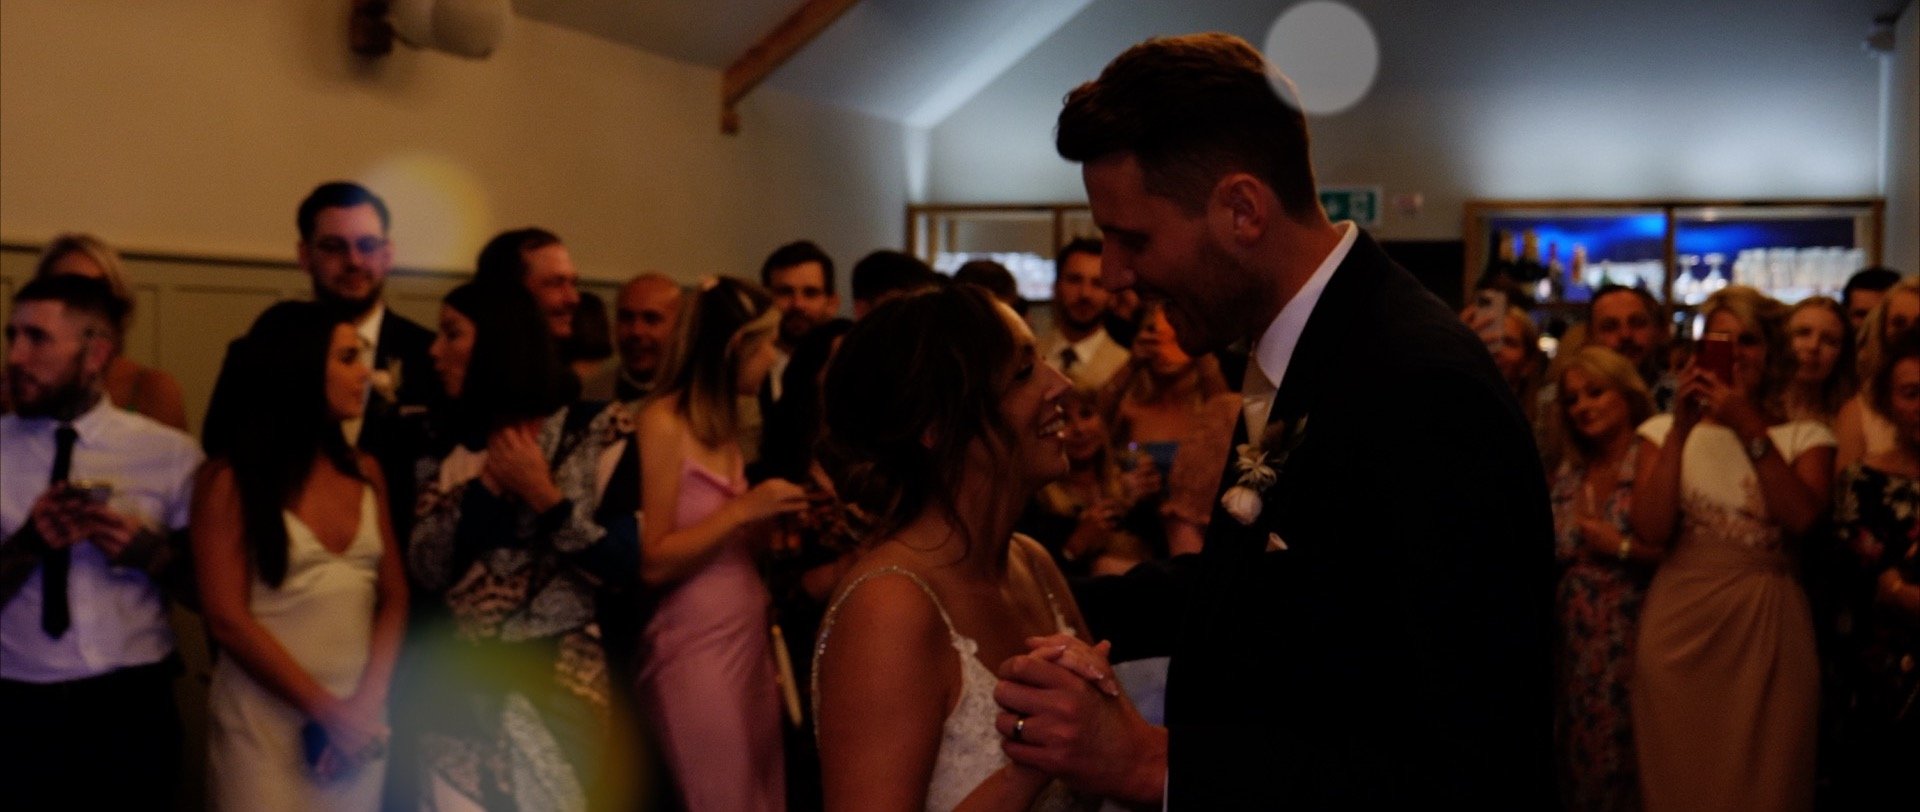 The first dance at Apton Hall - 3 Cheers Media videos.jpg